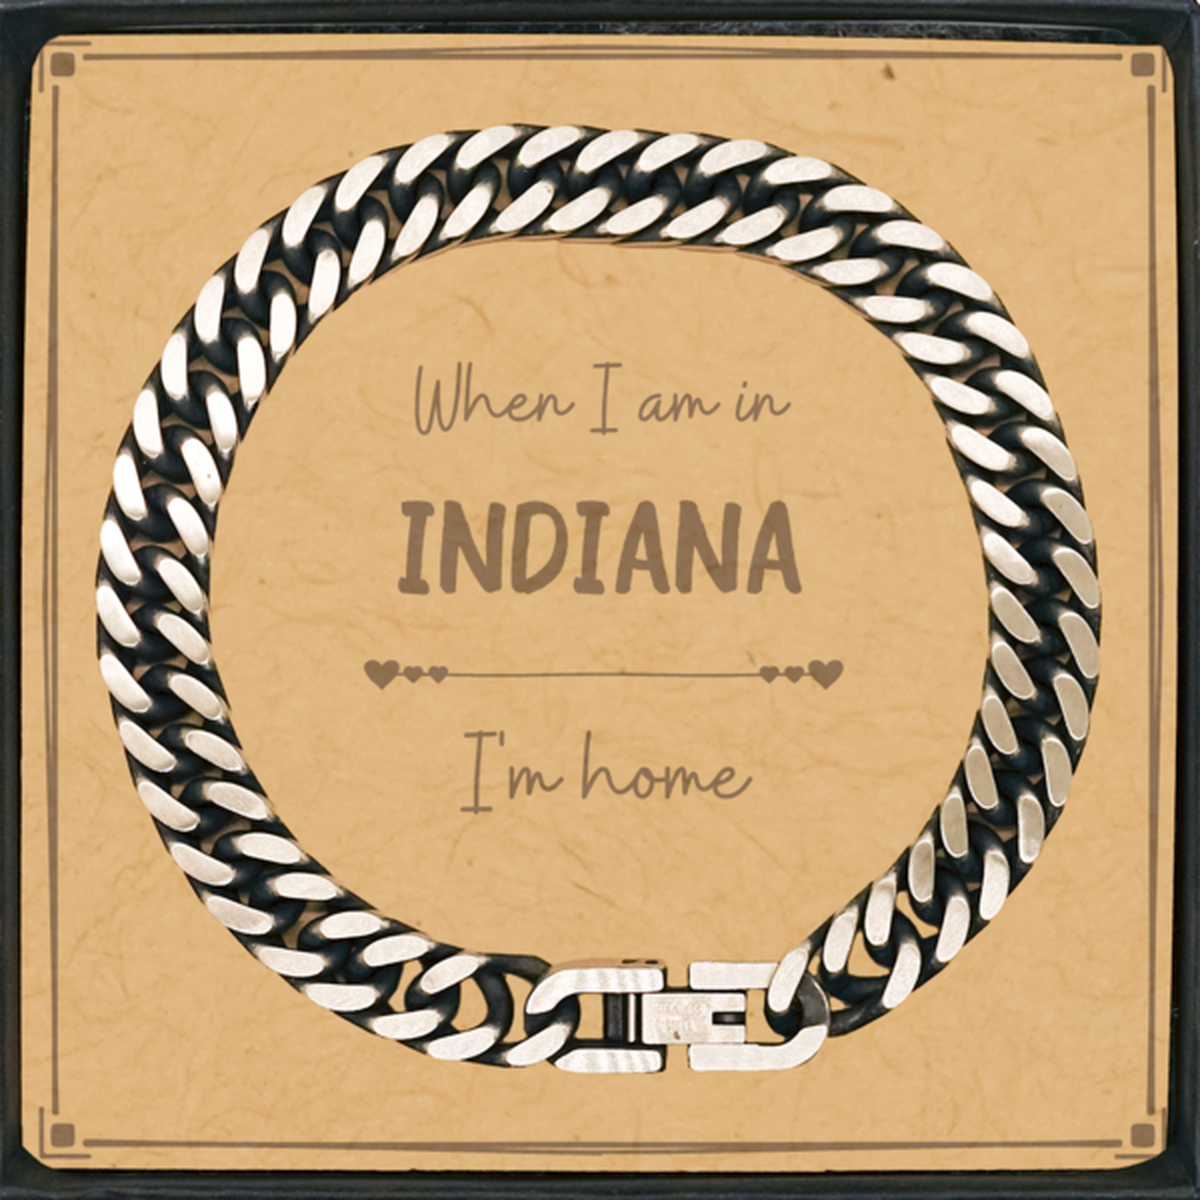 When I am in Indiana I'm home Cuban Link Chain Bracelet, Message Card Gifts For Indiana, State Indiana Birthday Gifts for Friends Coworker